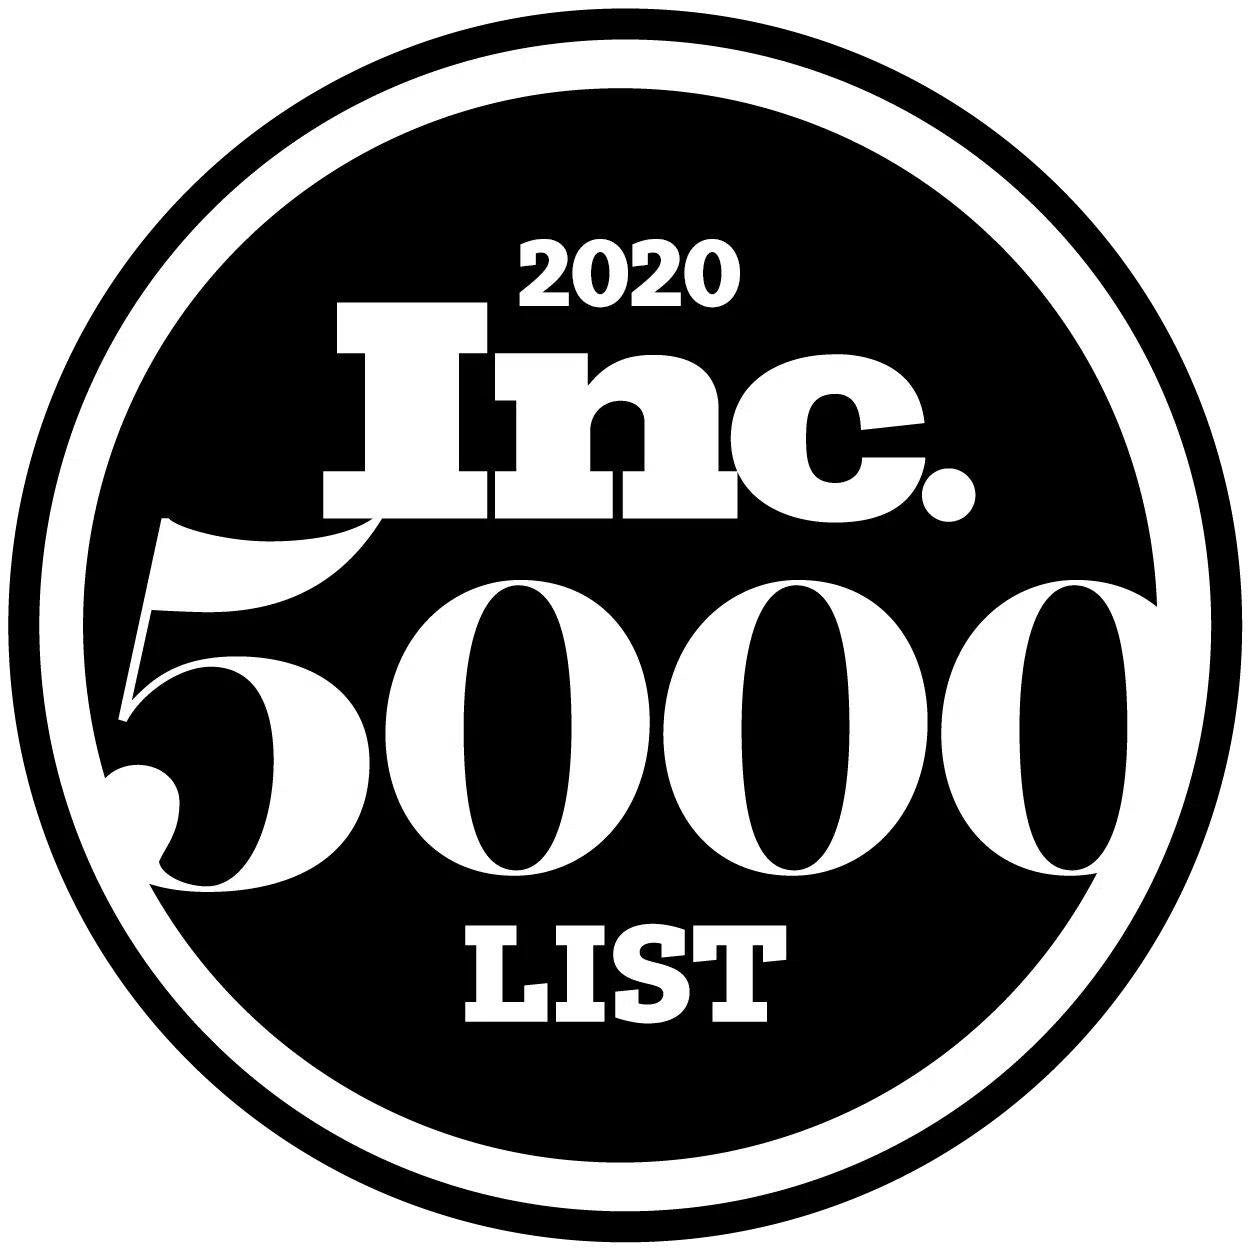 Search Solution Group Makes Inc. 5000 List for the 6th Consecutive Year